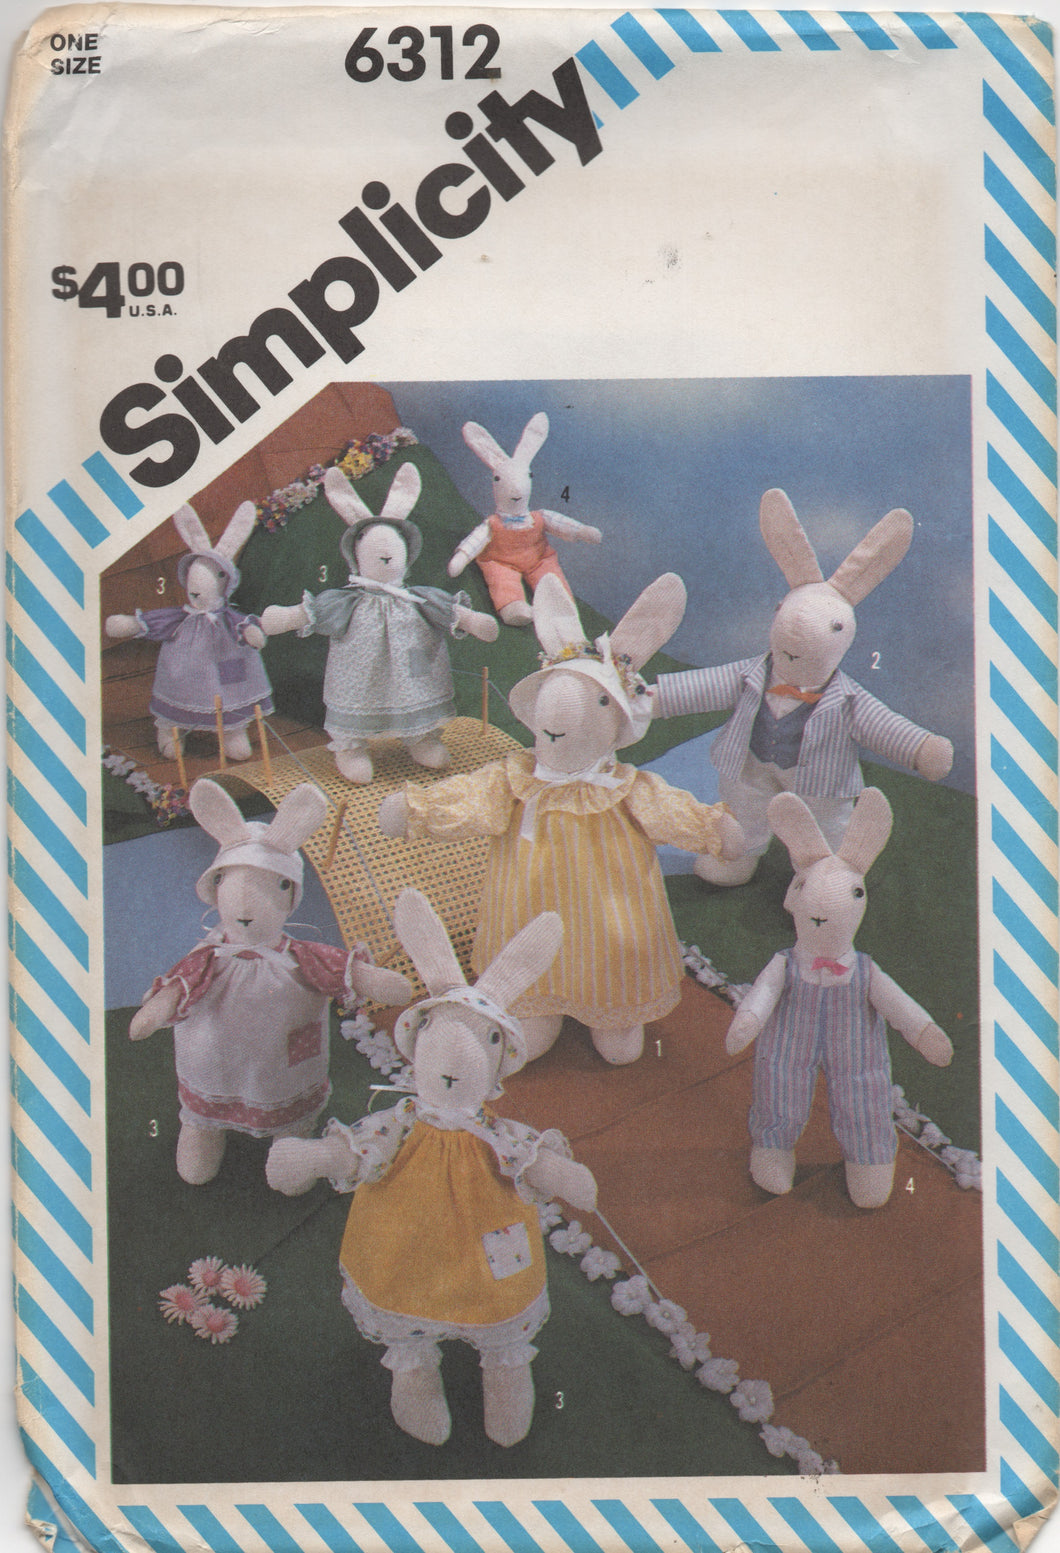 1980's Simplicity Easter Bunnies and Wardrobe - Two Sizes - No. 6312